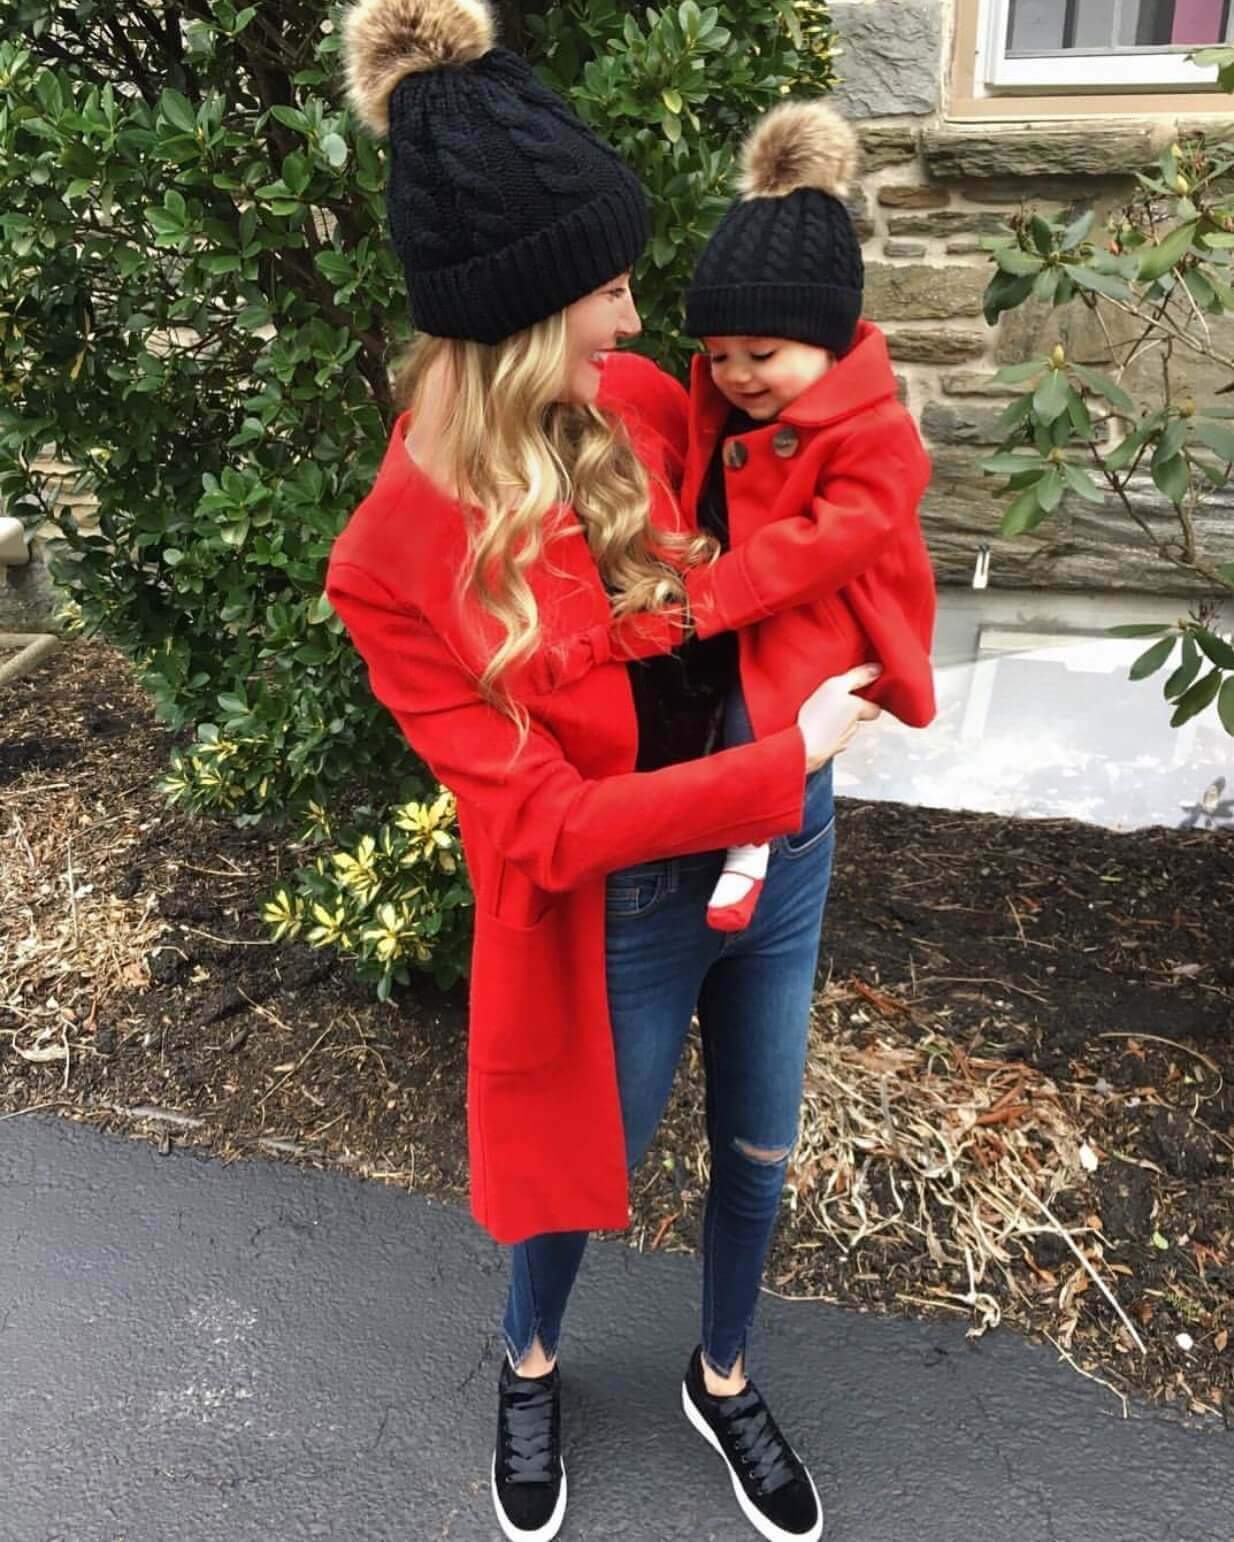 "Mommy & Me" Matching Faux Fur Beanies